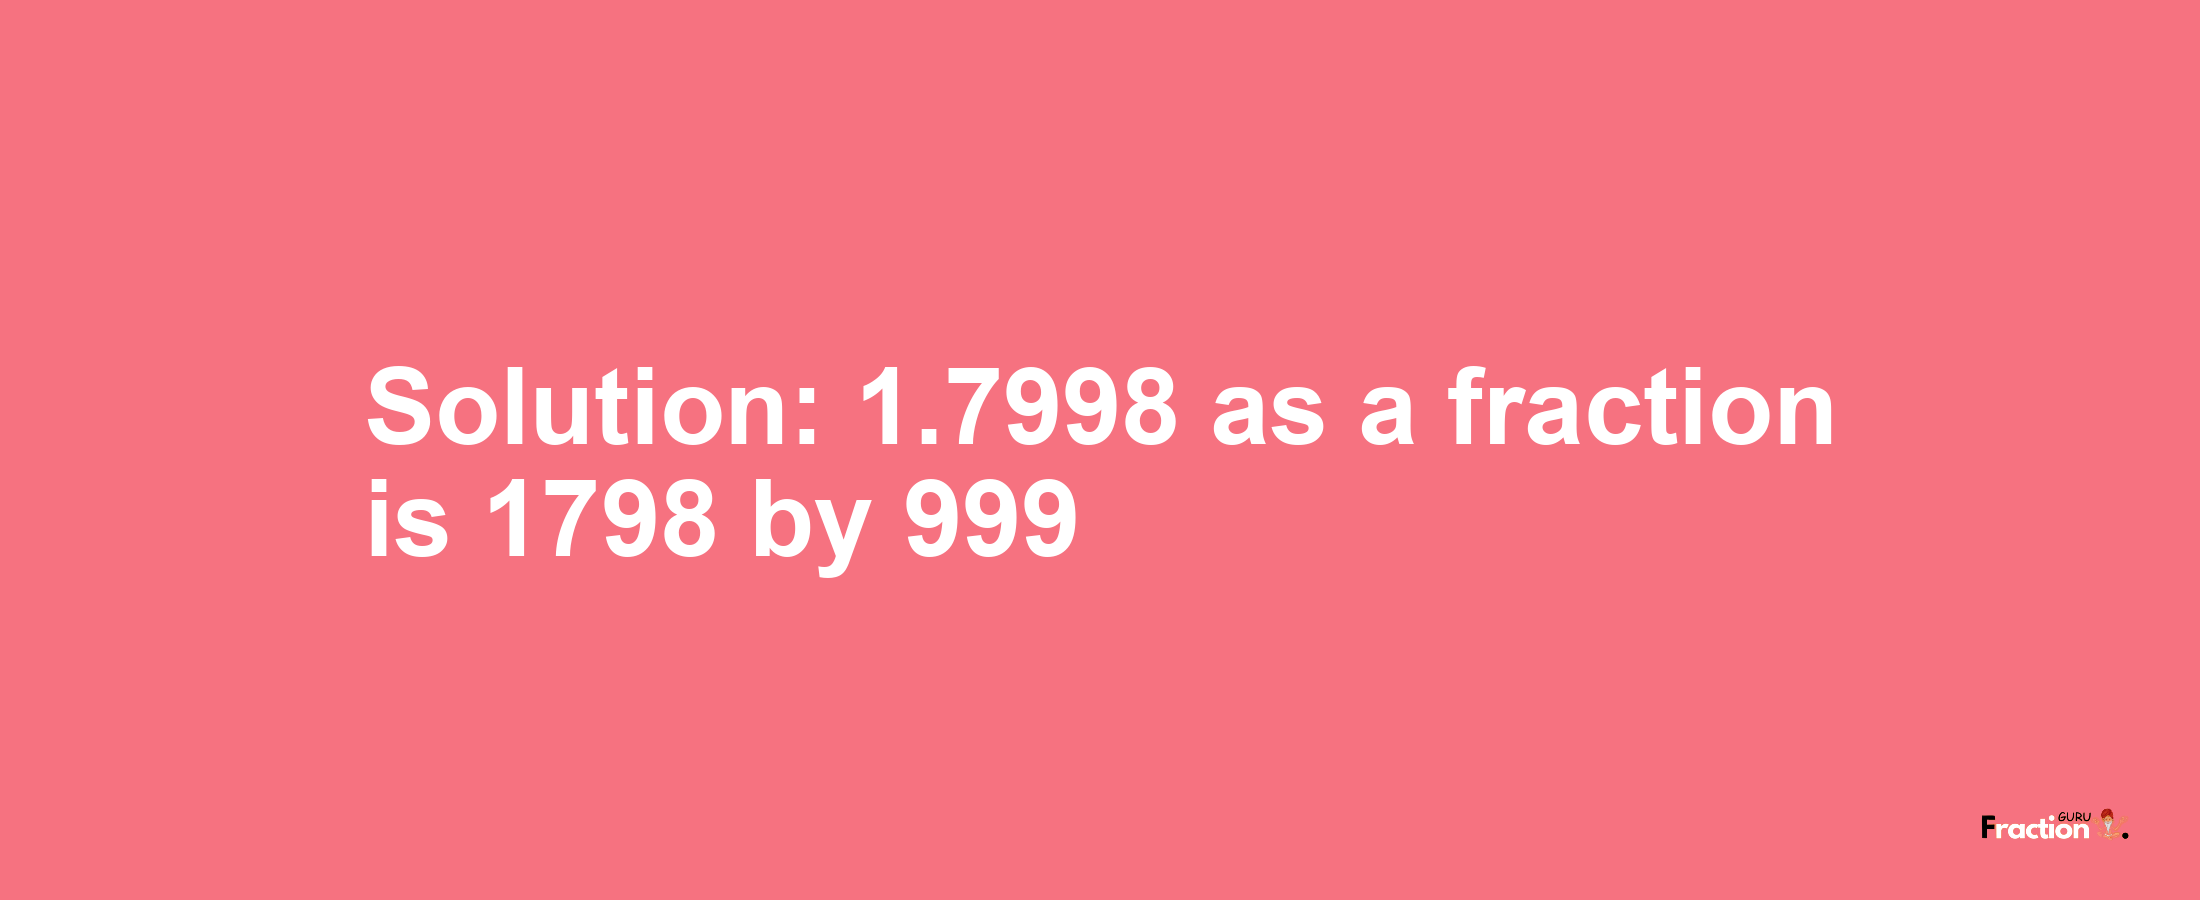 Solution:1.7998 as a fraction is 1798/999